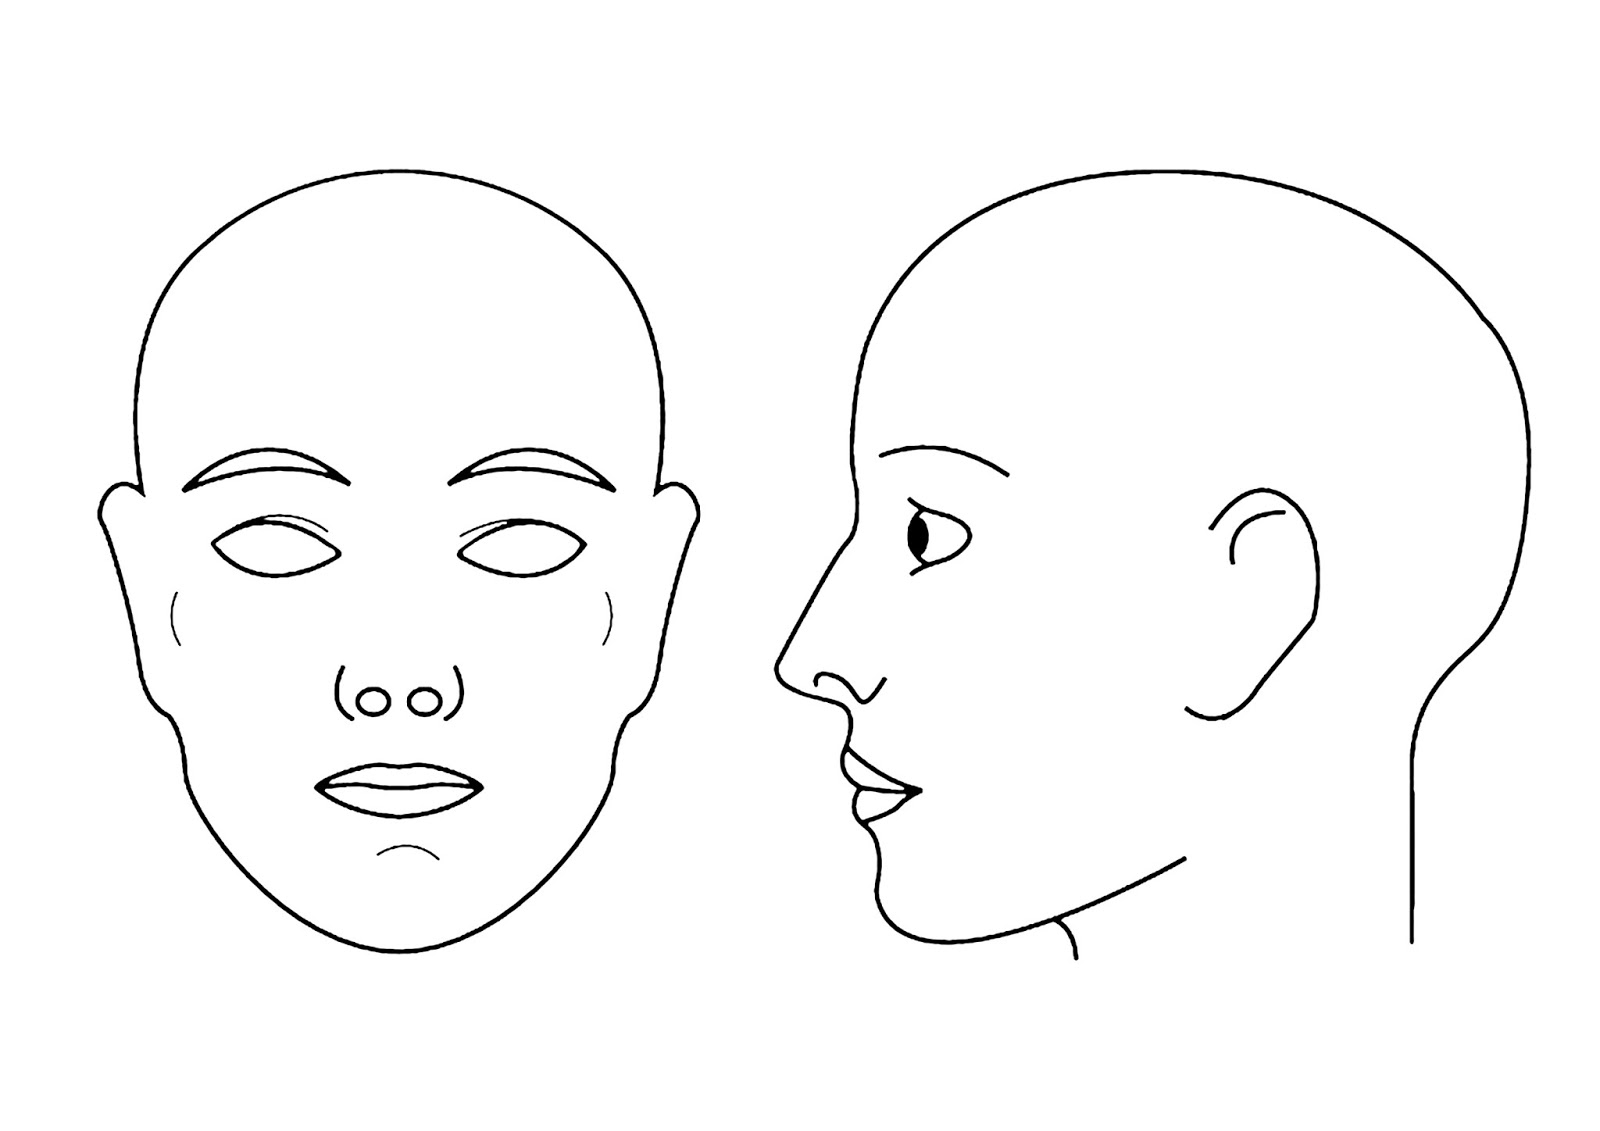 Free Blank Face Template Download Free Clip Art Free Clip Art On Clipart Library